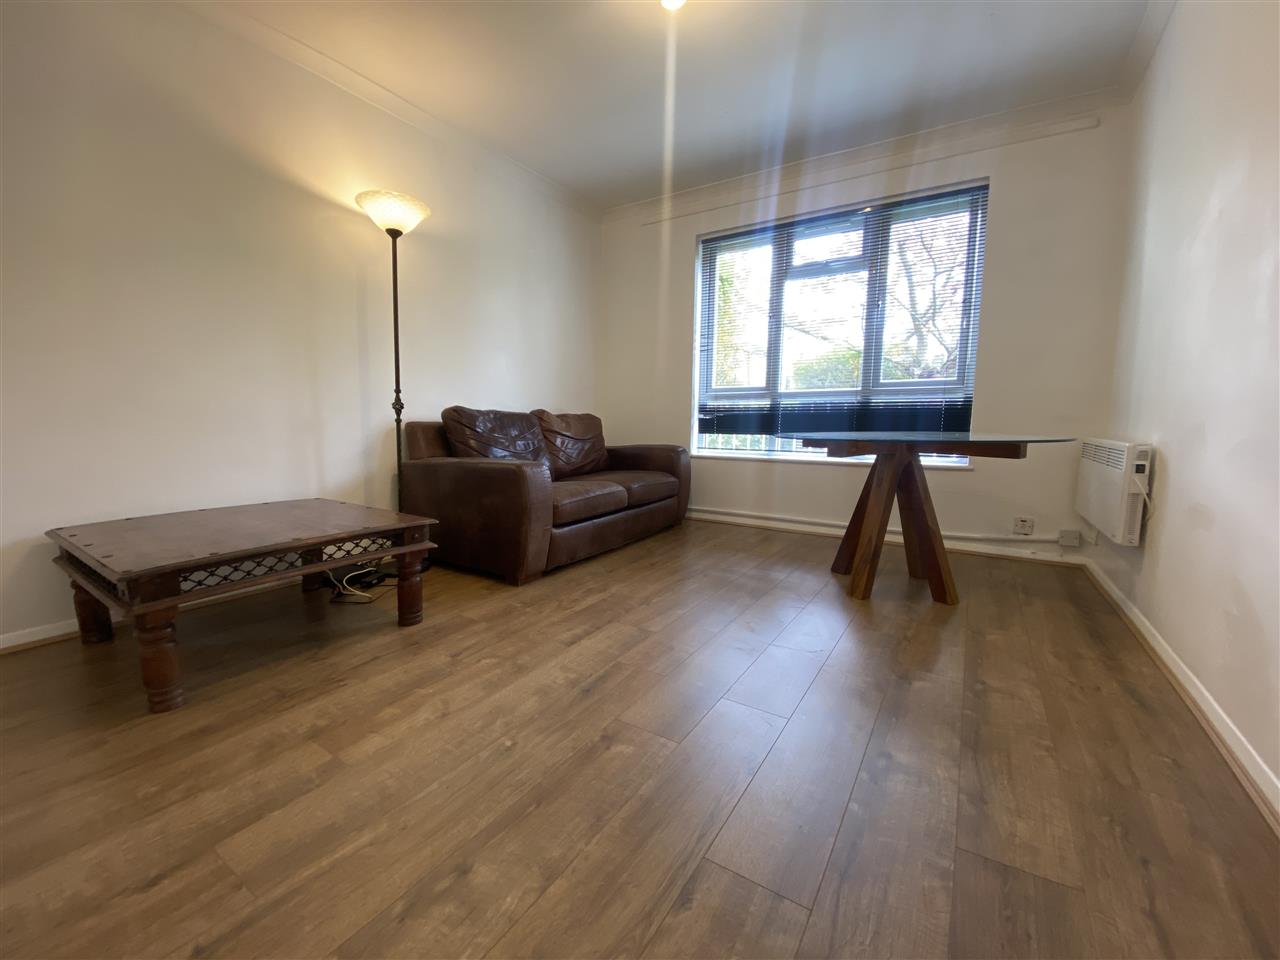 AVAILABLE IMMEDIATELY! Located moments from Fortess Road's trendy shops and restaurants and within walking distance of Northern line underground station is this delightful ground floor FURNISHED purpose built flat. The accommodation comprises of a well sized double bedroom with full length ...